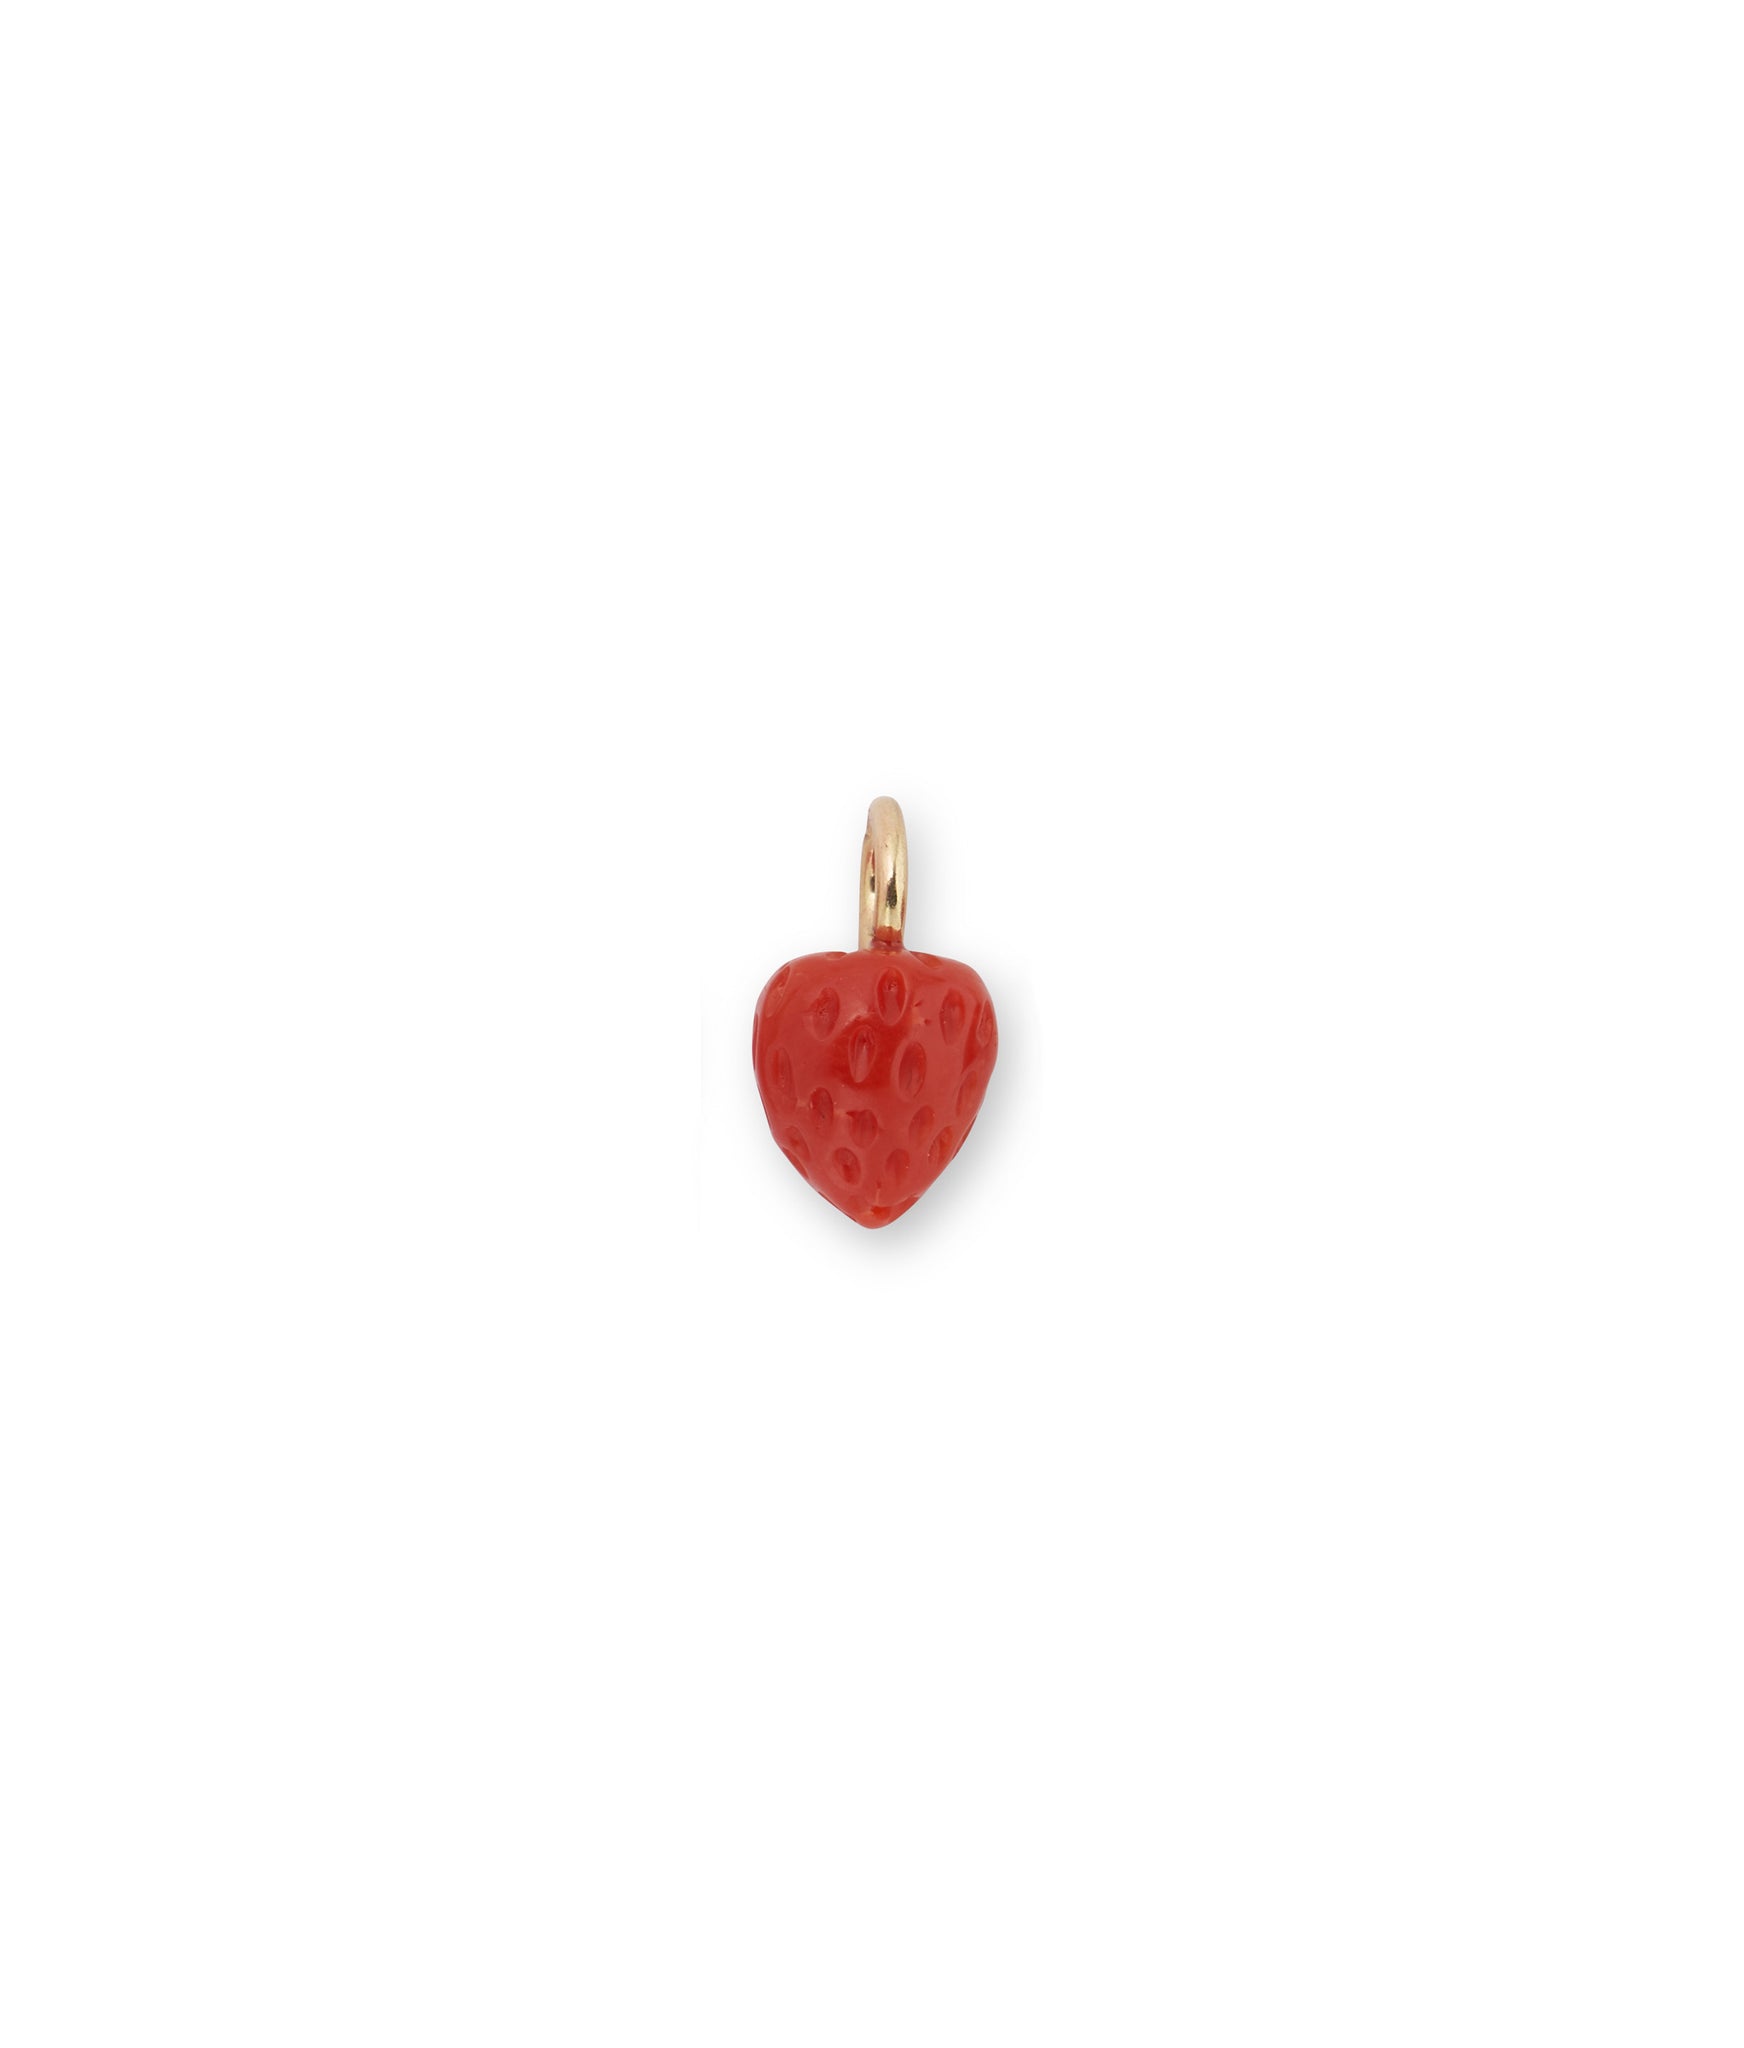 Puffy Coral Strawberry 14k Gold Necklace Charm | Lizzie Fortunato ...